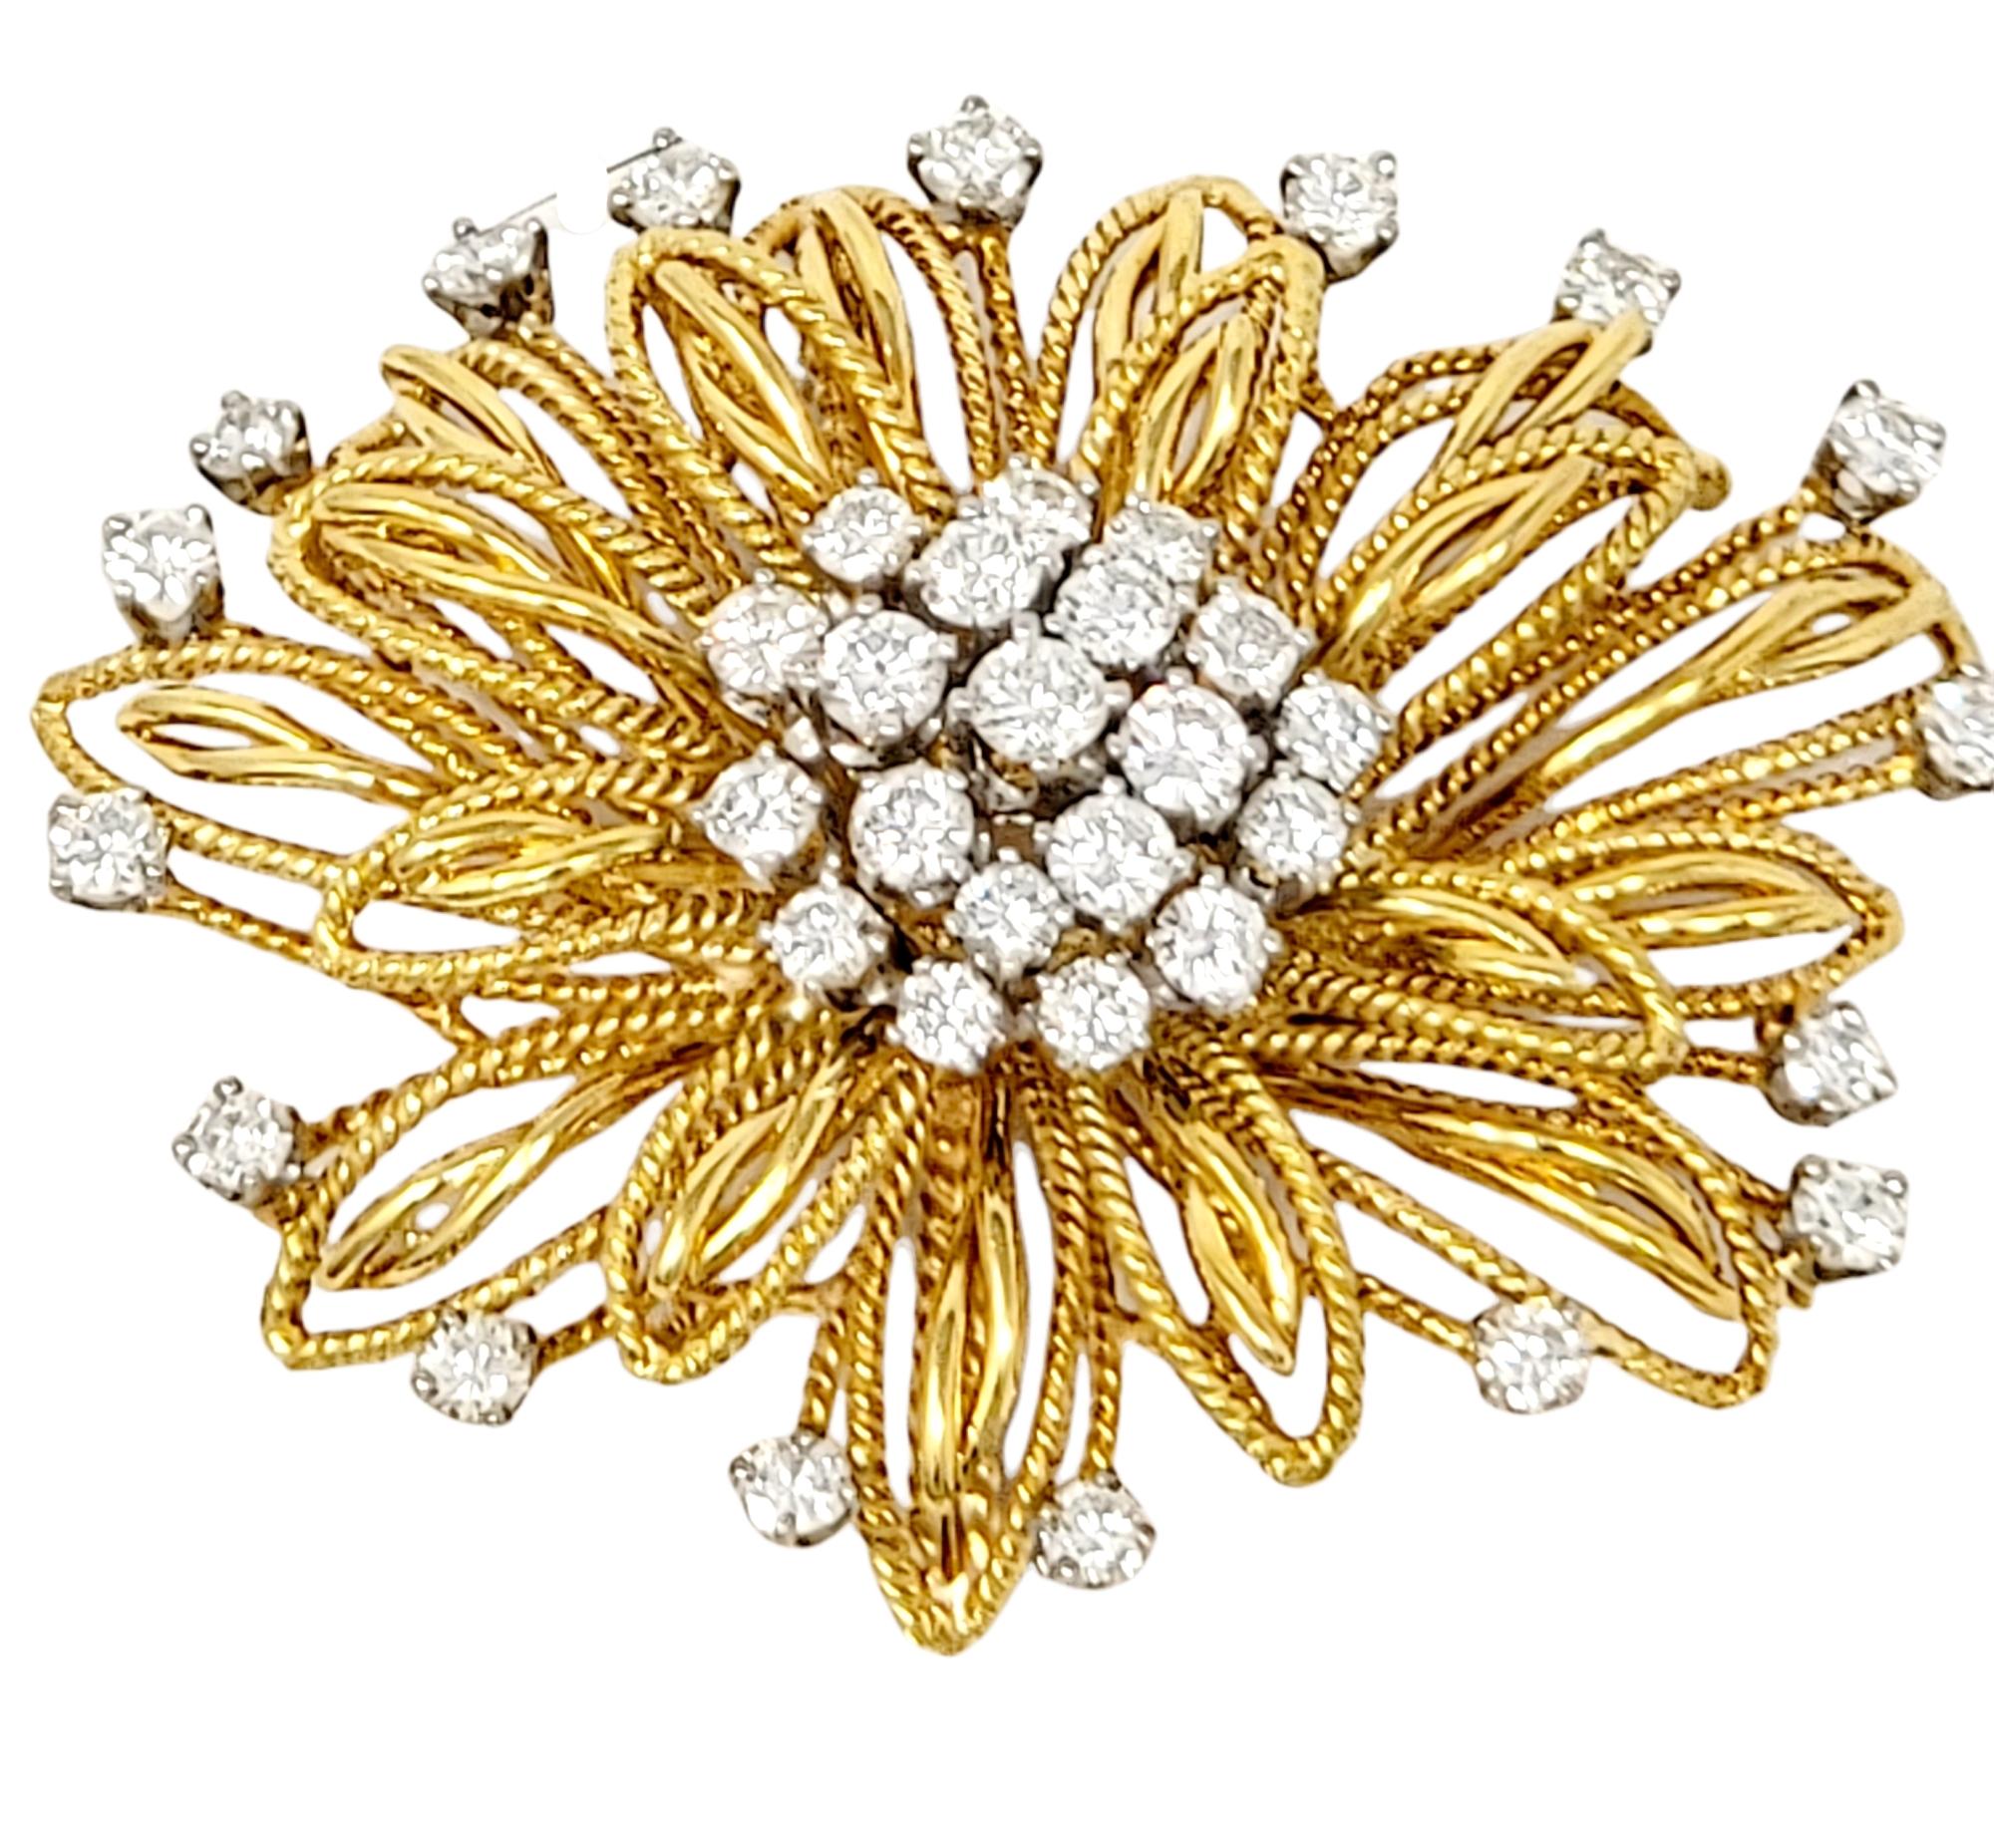 Absolutely gorgeous diamond and 18 karat yellow gold flower motif brooch. This beautifully textured piece is accented by incredible sparkling diamonds that shimmer throughout. The exquisite brooch features multiple layers of delicate, open gold